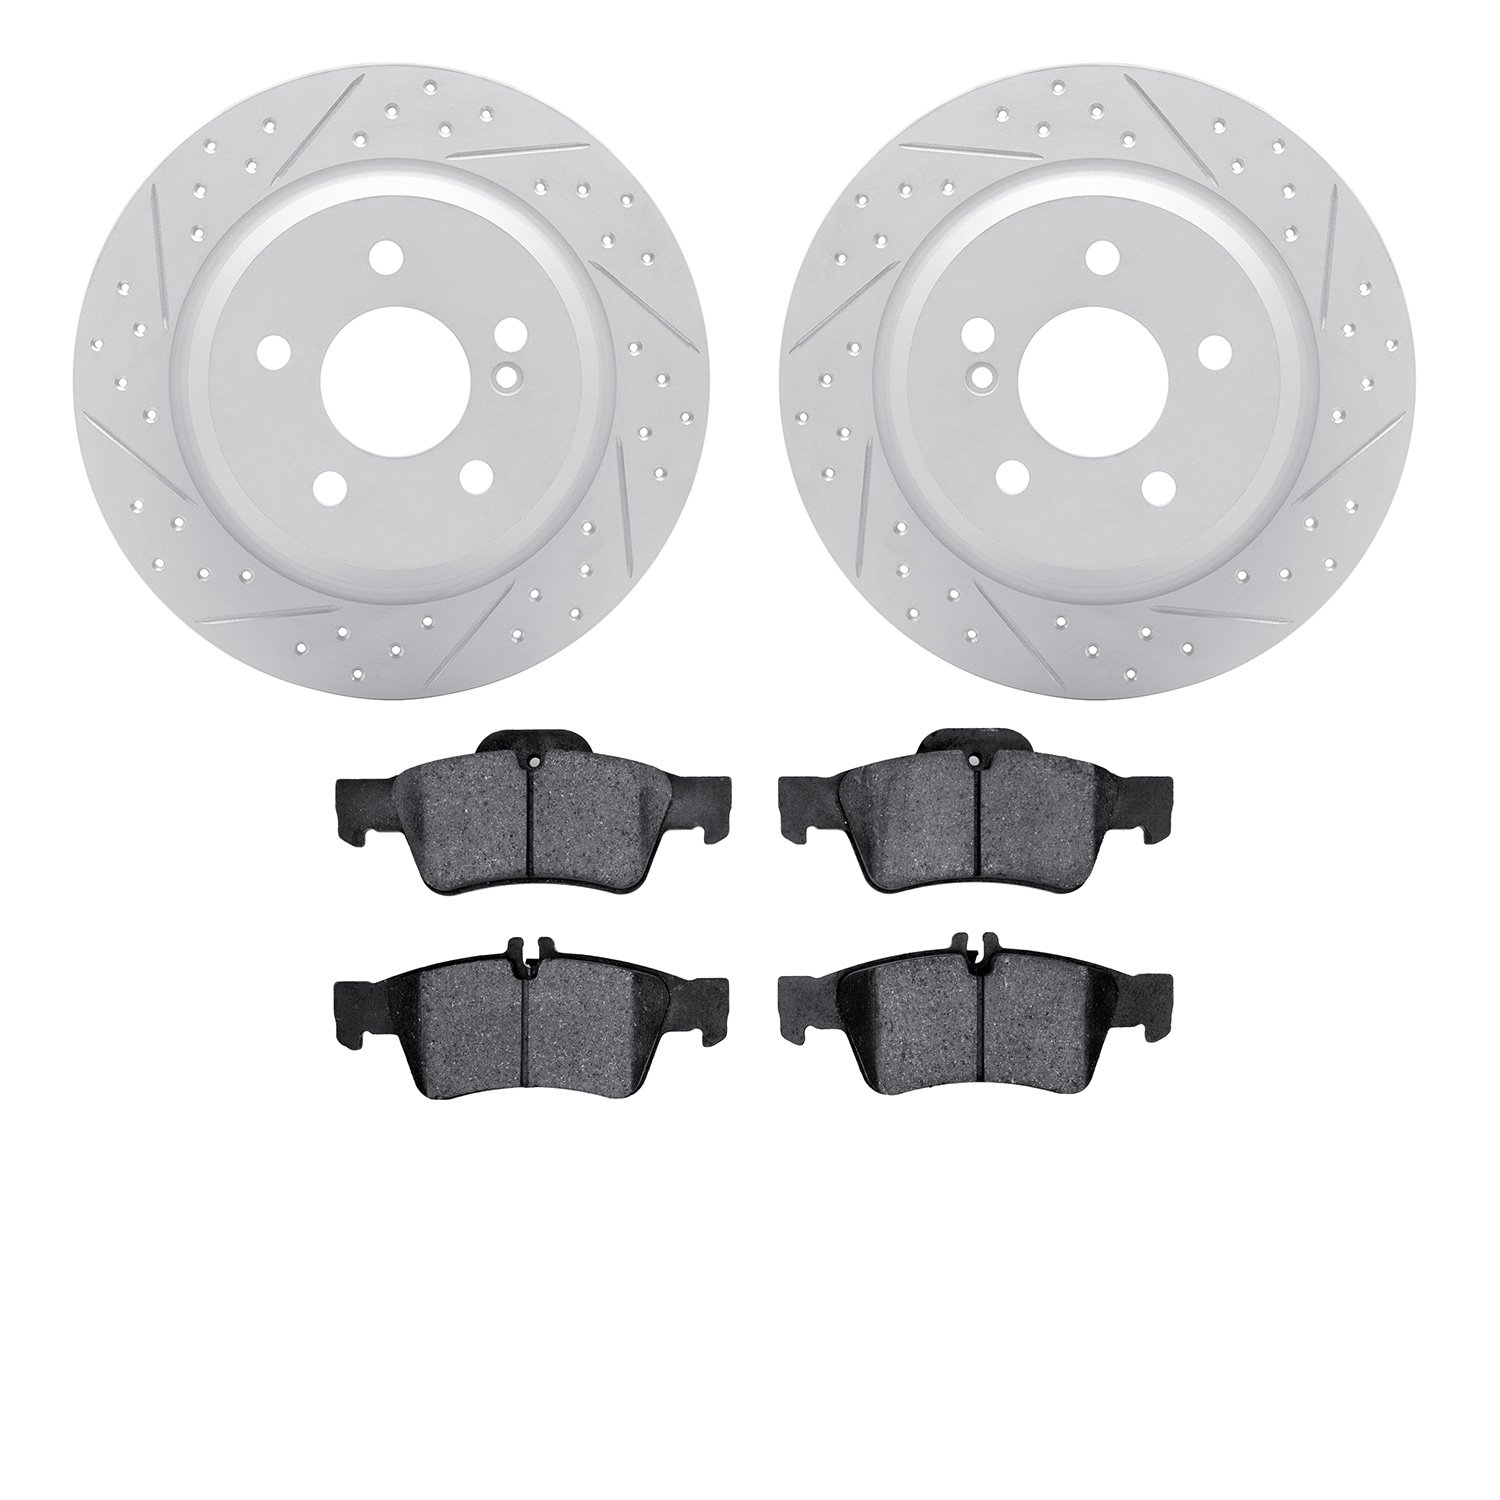 2502-63025 Geoperformance Drilled/Slotted Rotors w/5000 Advanced Brake Pads Kit, 2014-2016 Mercedes-Benz, Position: Rear